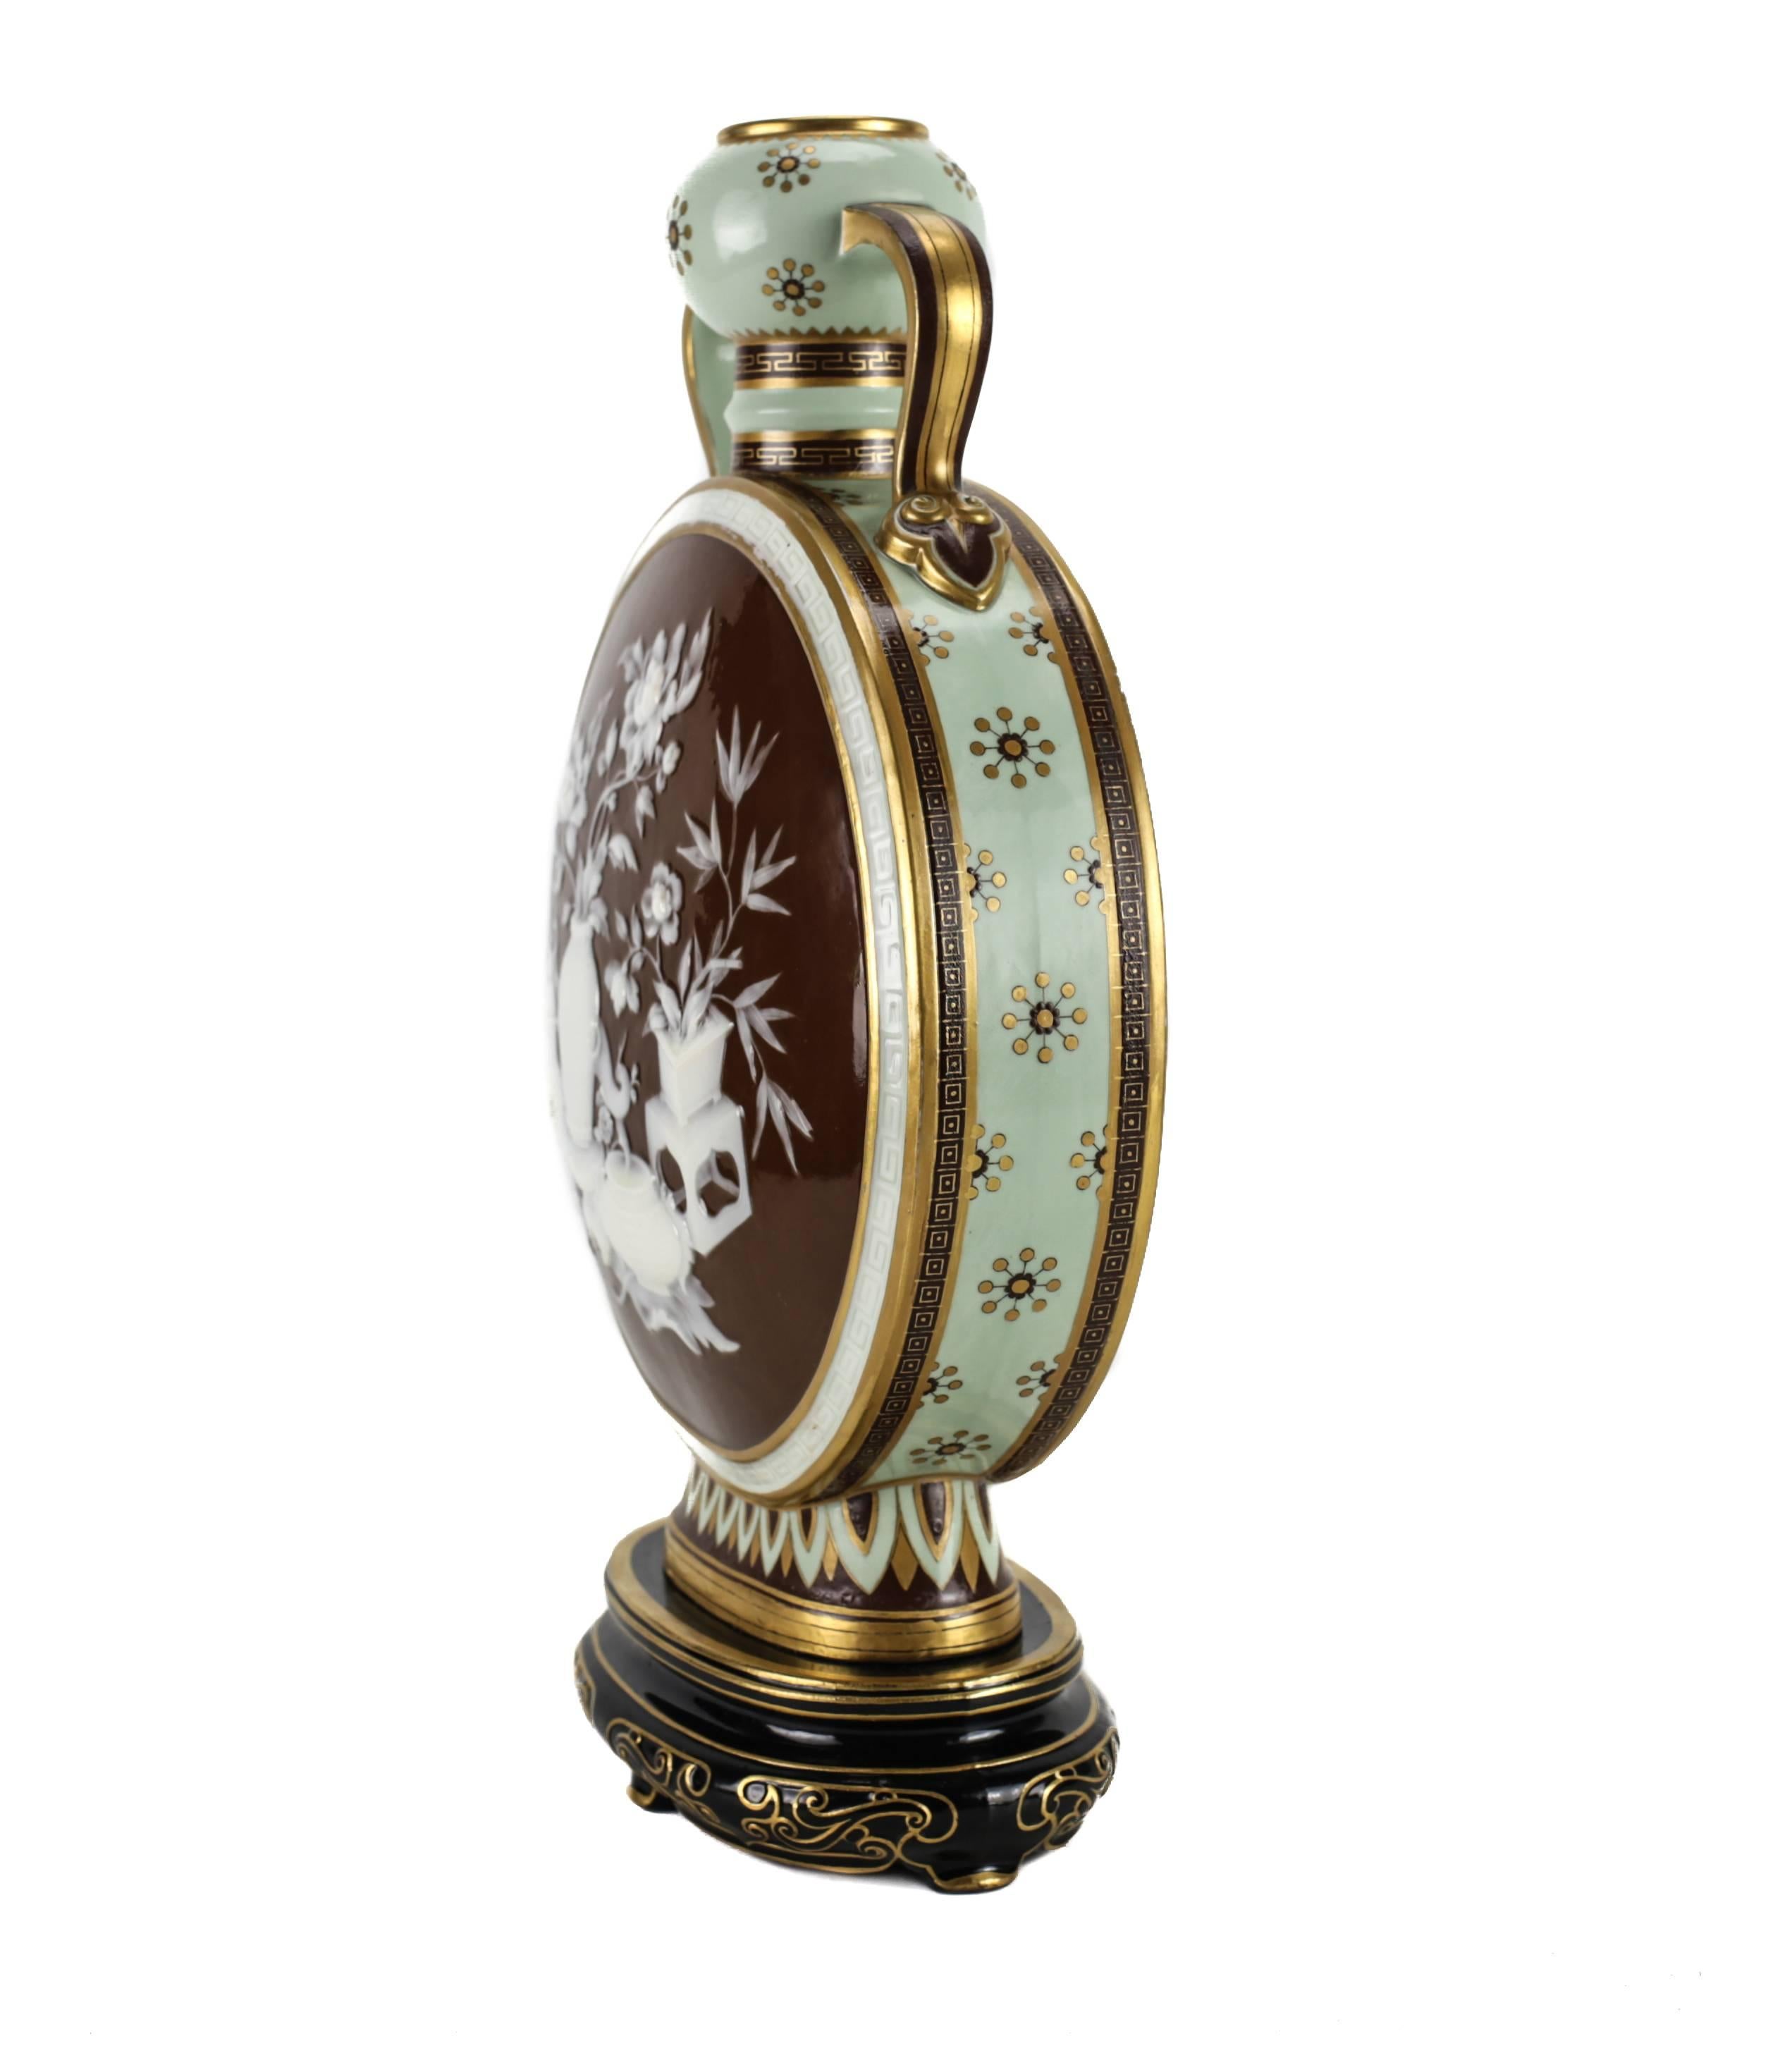 Pate-Sur-Pate Decorated Porcelain Moon Flask by Mintons, 1876 In Good Condition For Sale In Pasadena, CA